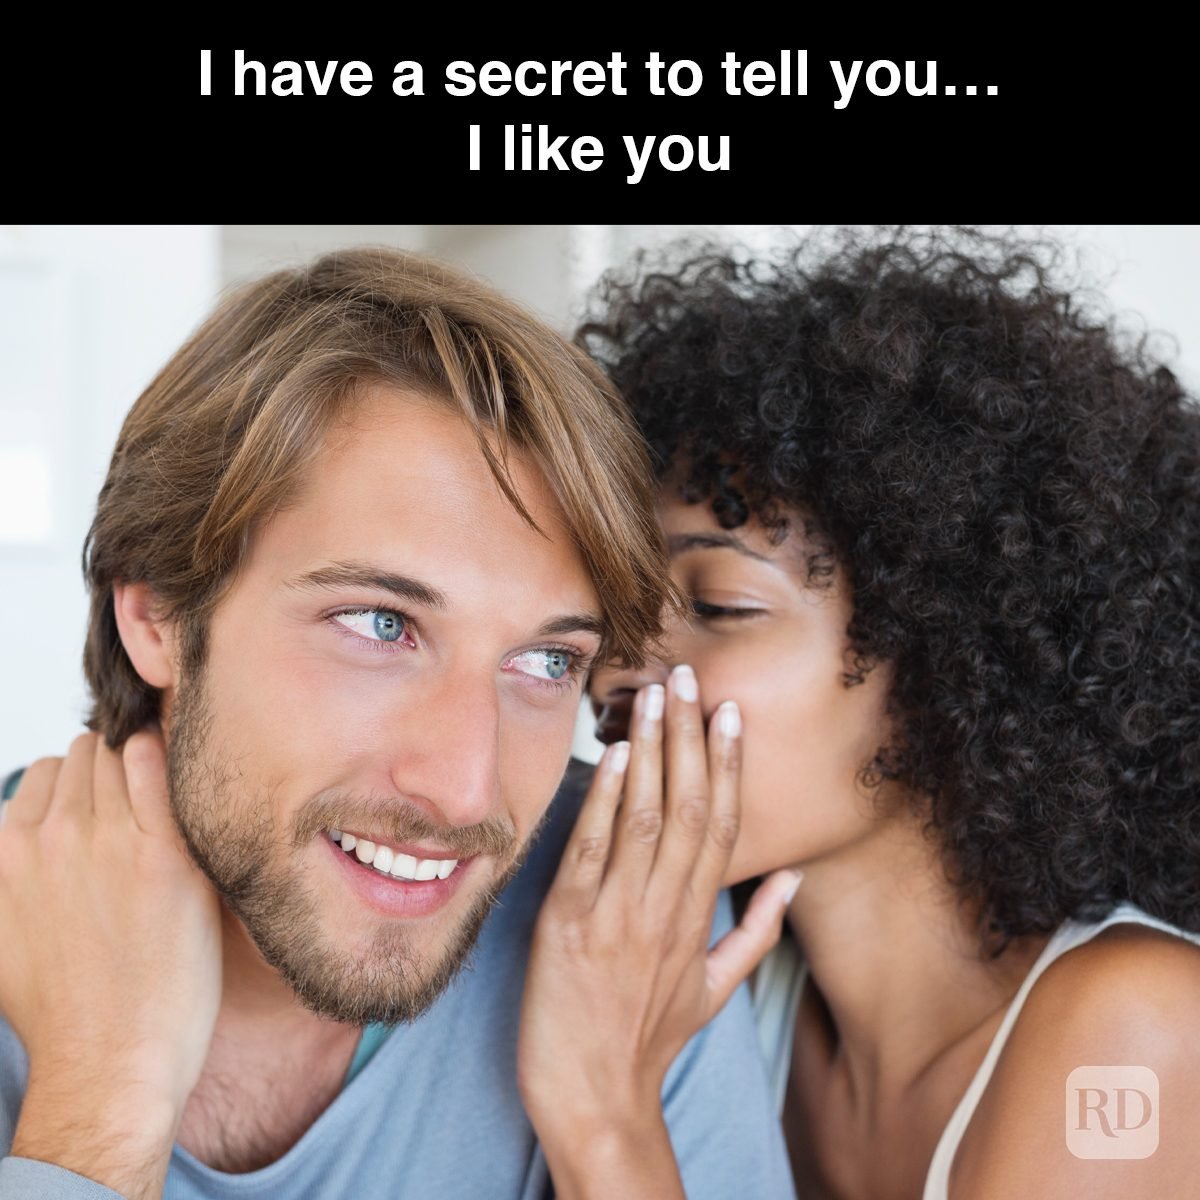 50 Flirty Memes to Make That Special Someone Giggle